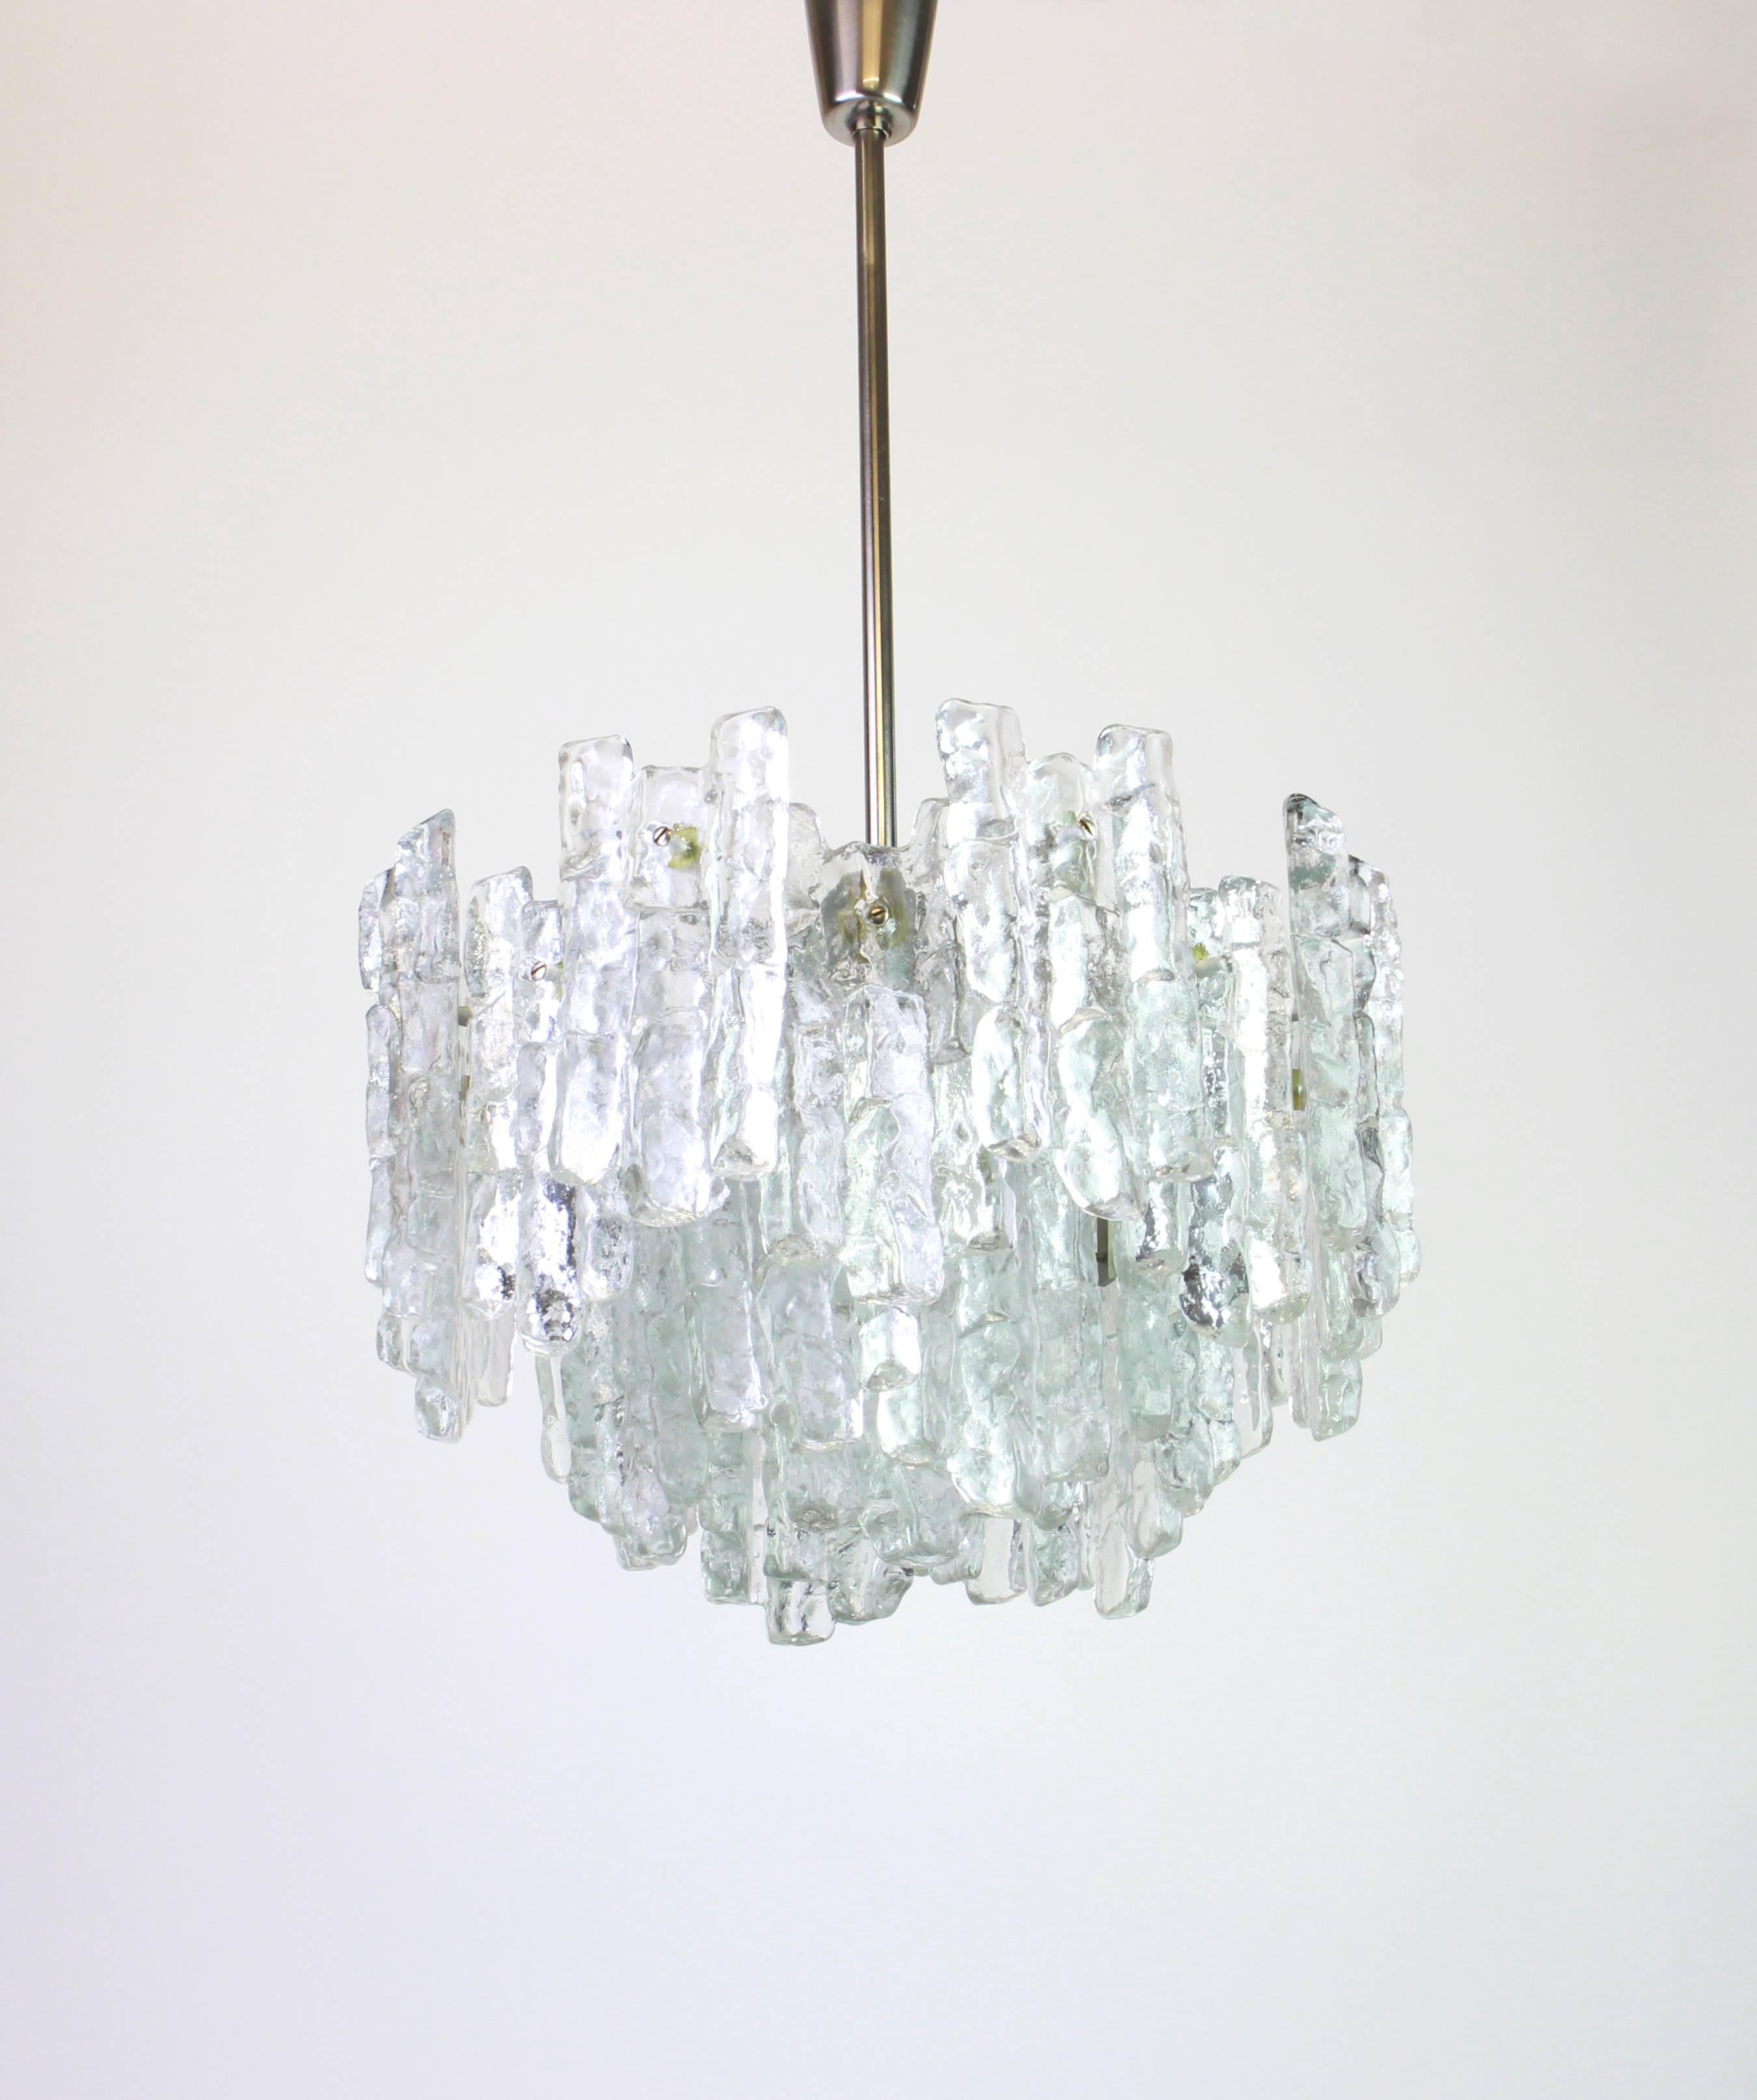 1 of 4 Large Murano Ice Glass Chandelier by Kalmar, Austria, 1960s For Sale 2